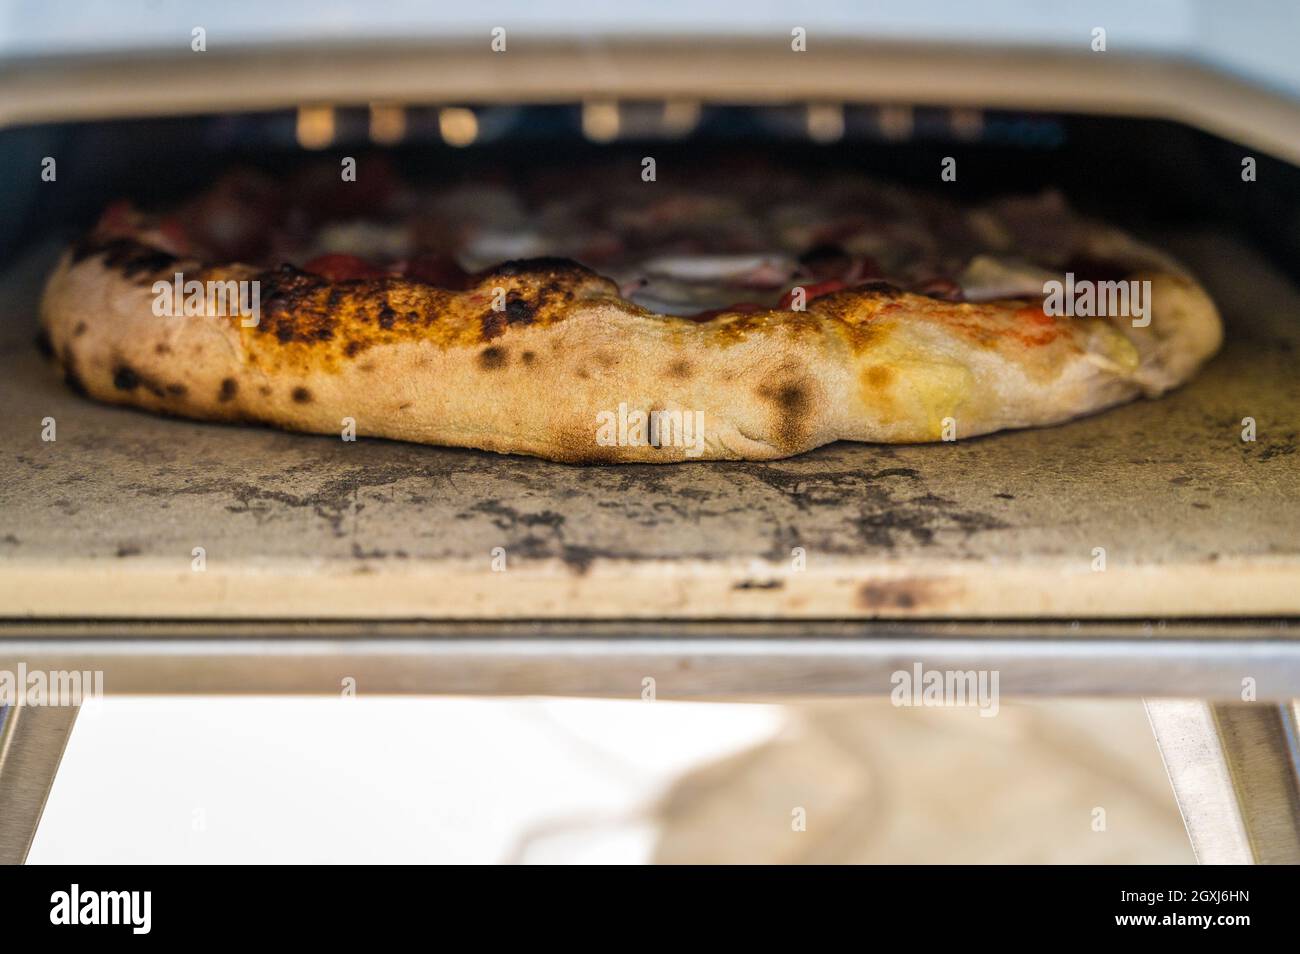 Making homemade pizza in portable high temperature gas pizza oven. Delicious pizza is baking in gas oven furnace for home made Neapolitan pizza. Speci Stock Photo